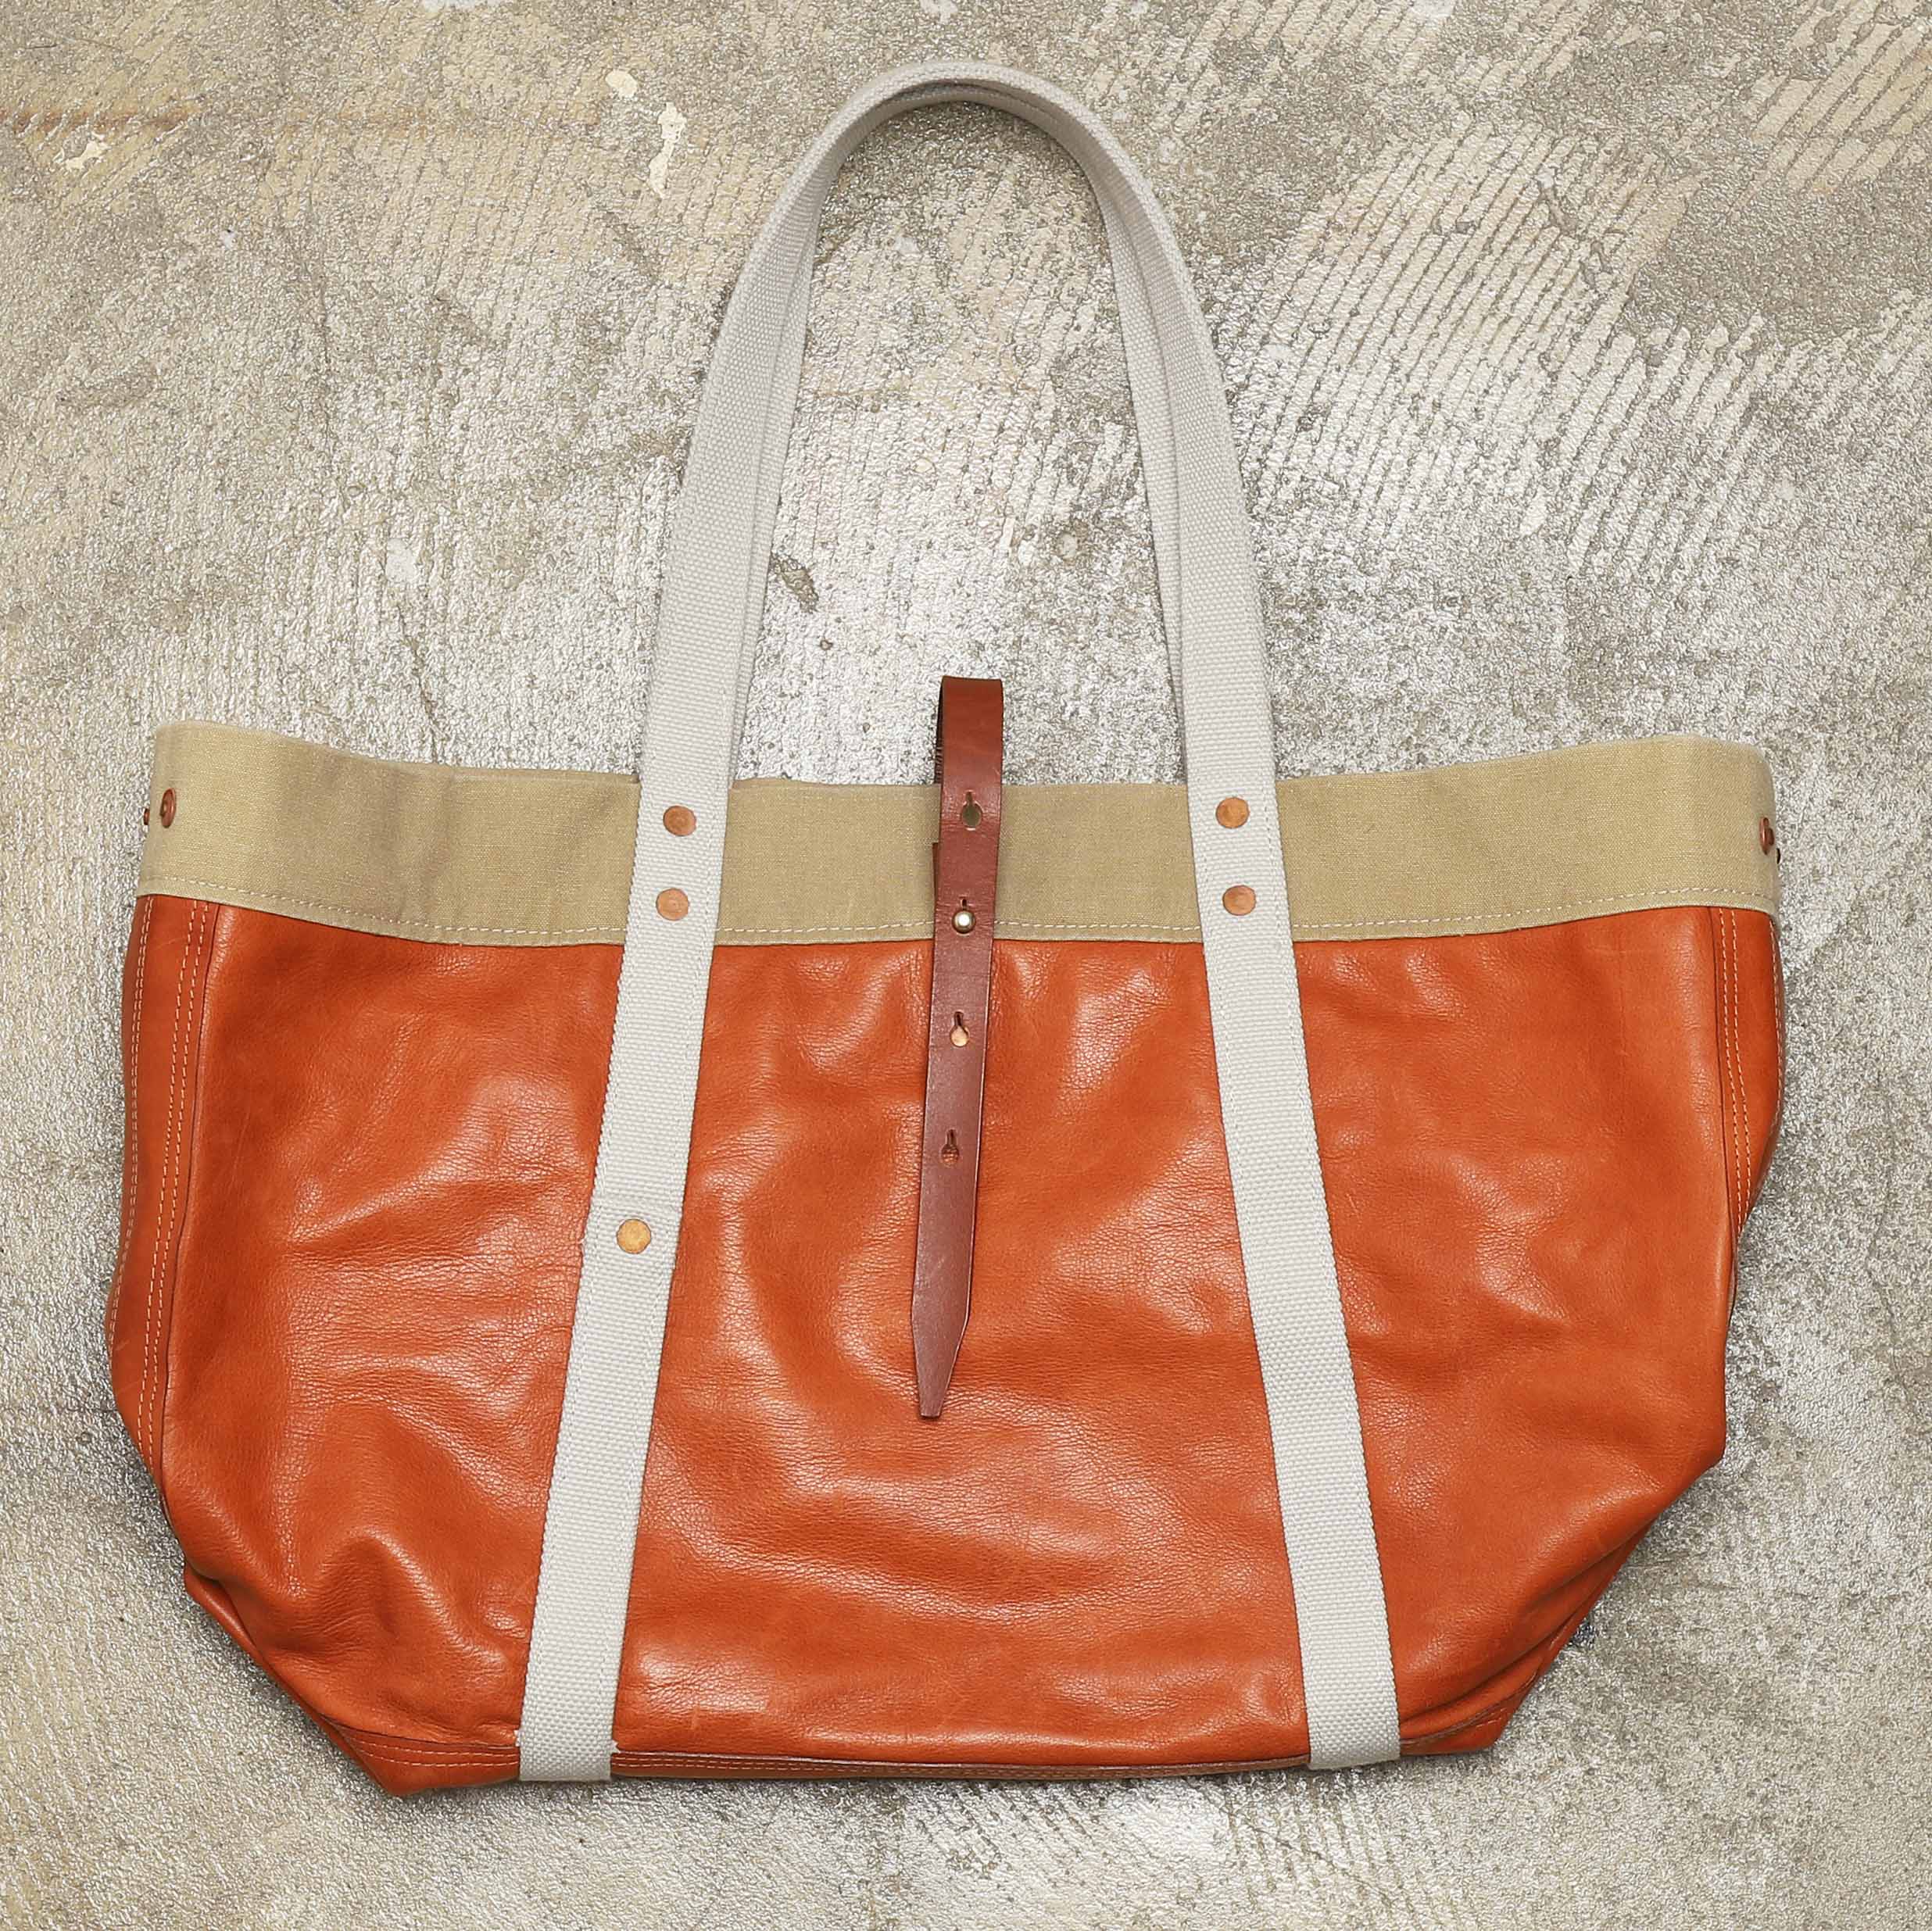 RUGGED FACTORY VEGETABLE TAN LEATHER TOTE BAG